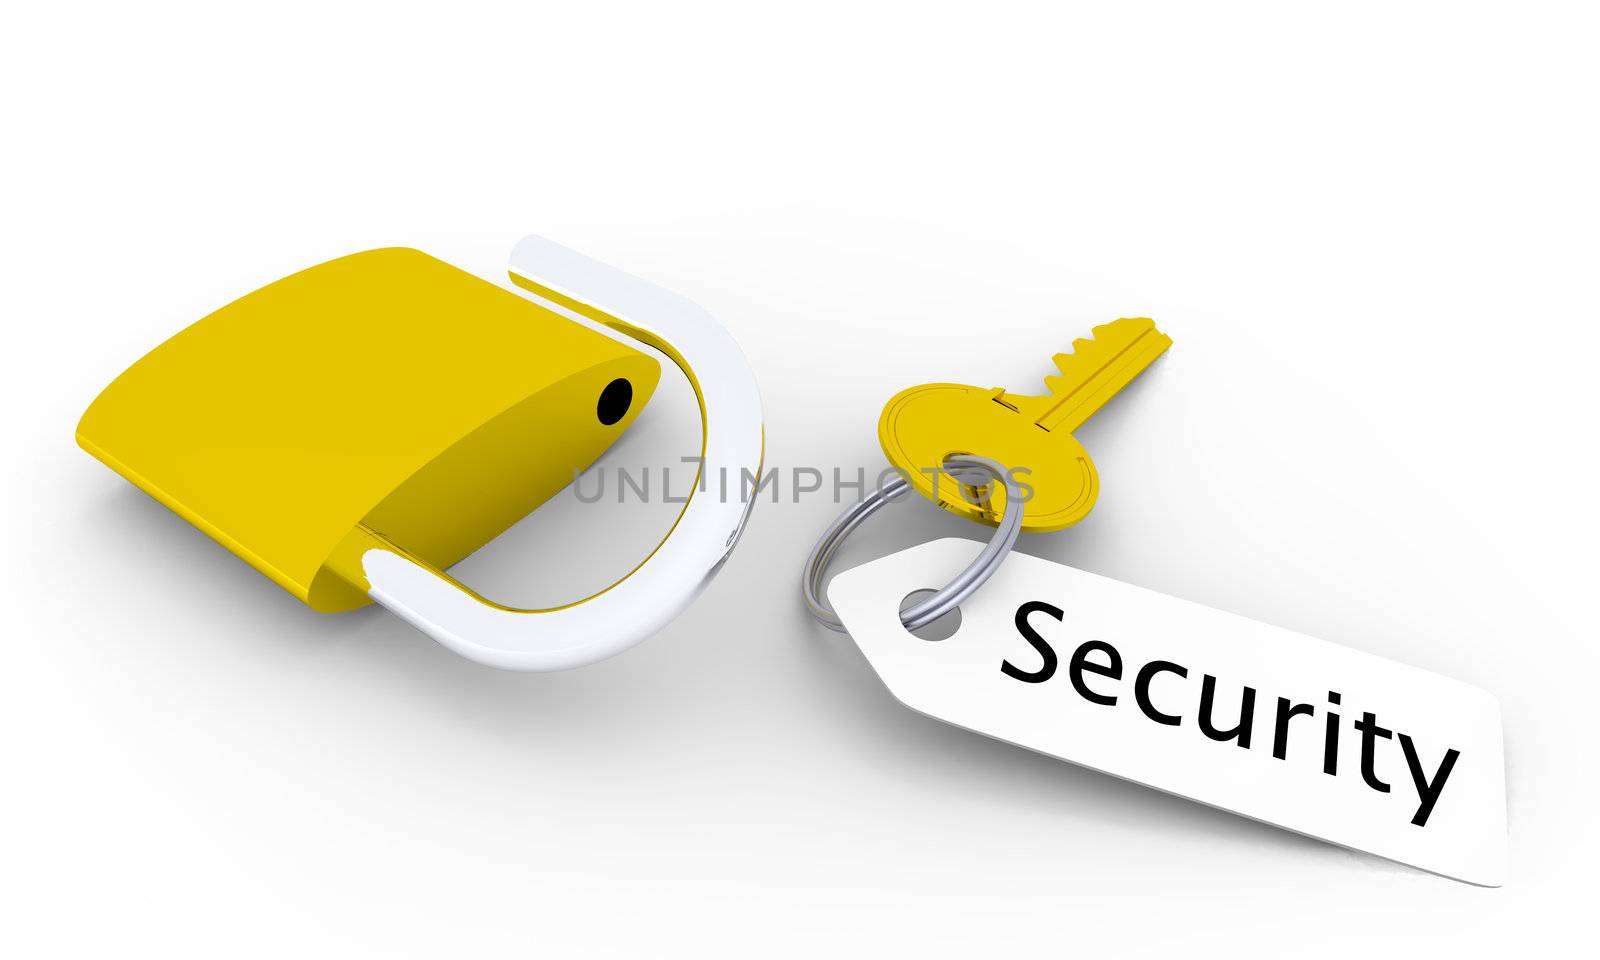 Security key by Harvepino